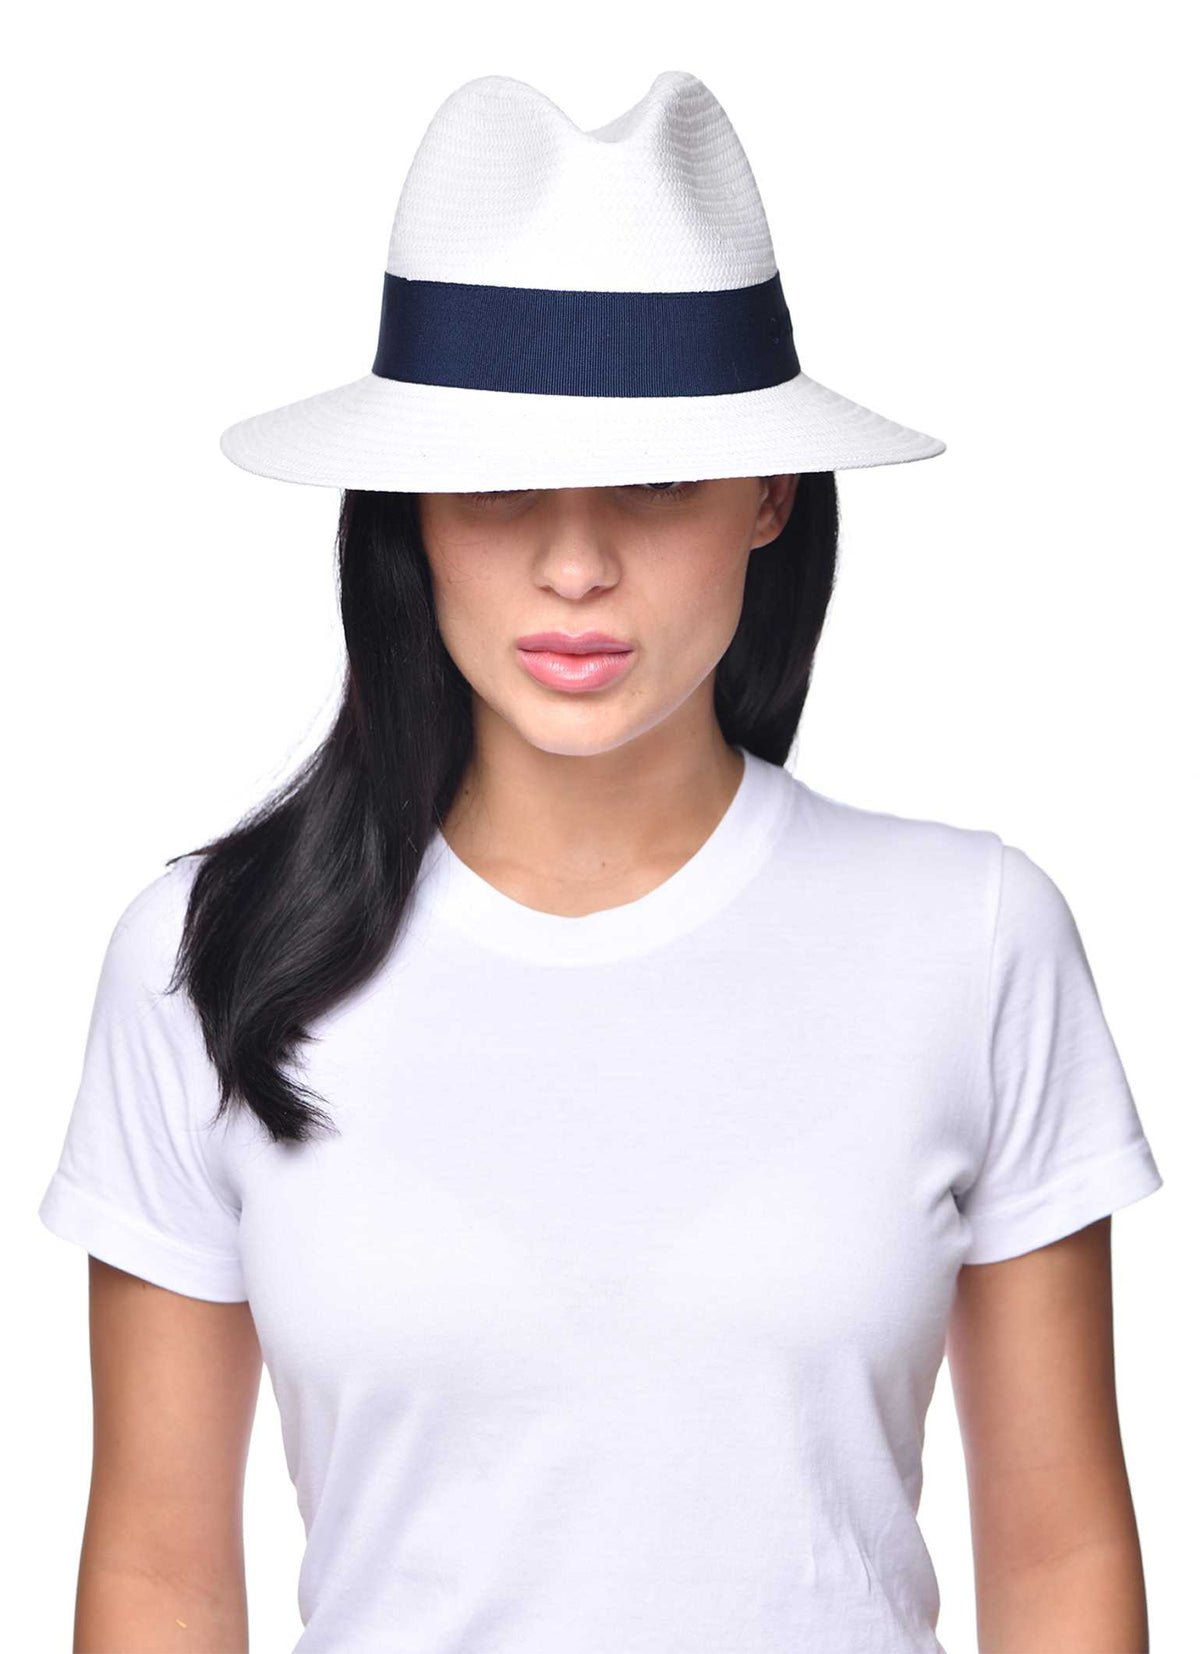 Dolores 2 packable fedora hats for women in color navy blue